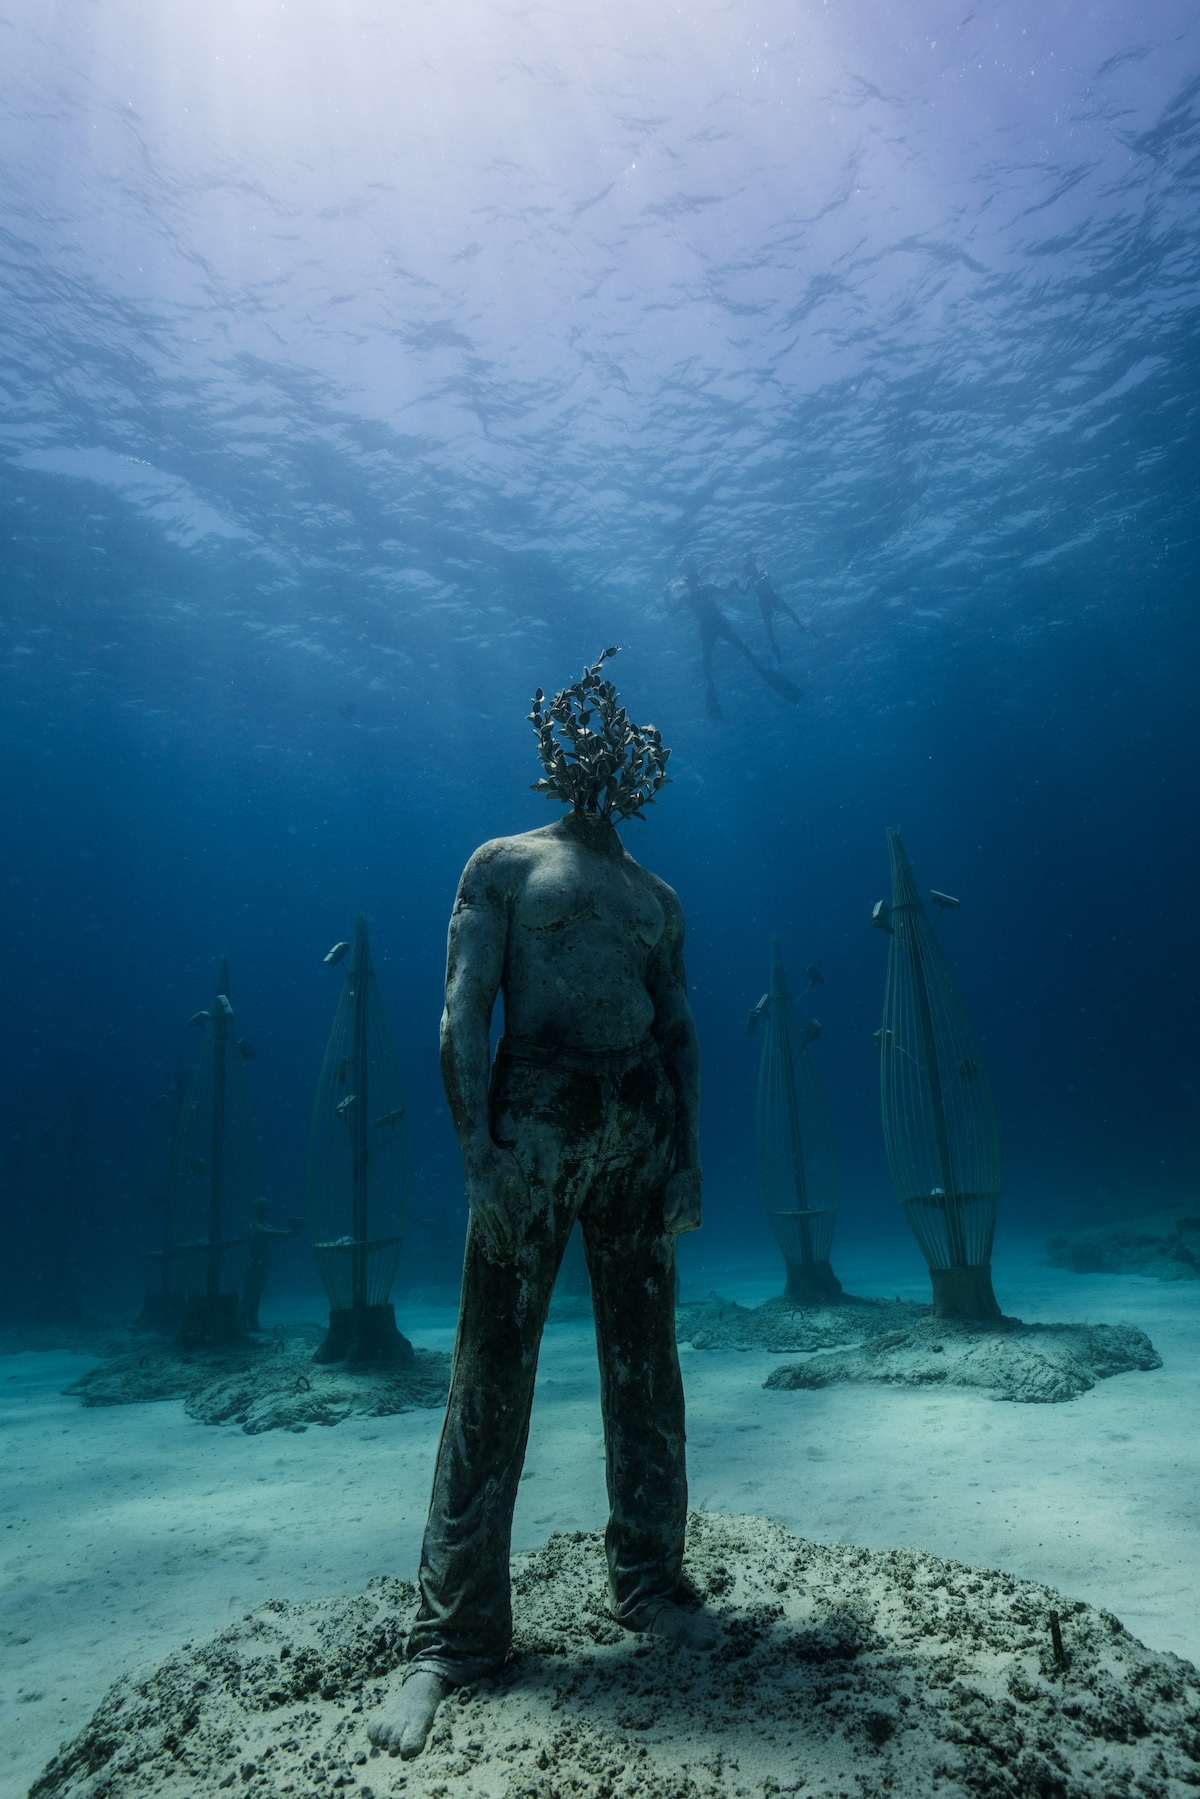 Sculpture by Jason deCaires Taylor, MUSAN, the first underwater museum in the Mediterranean